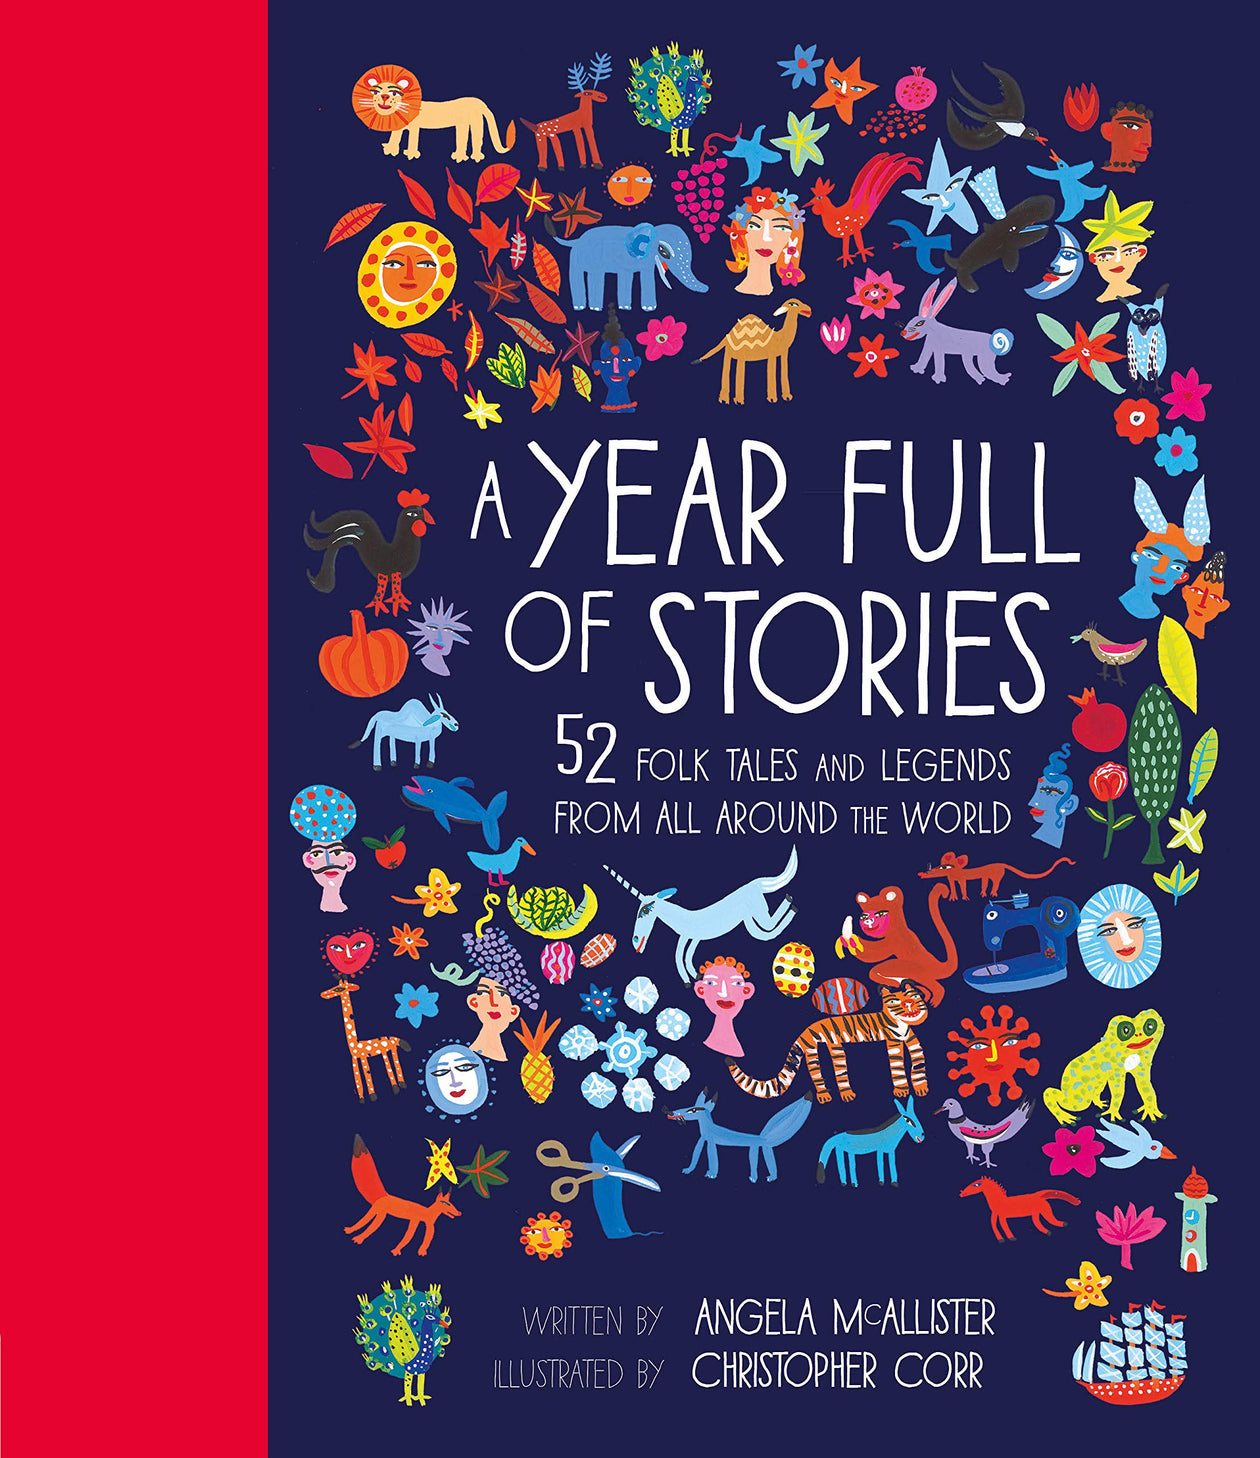 A Year Full of Stories by Angela McAllister, illustrated by Christopher Corr